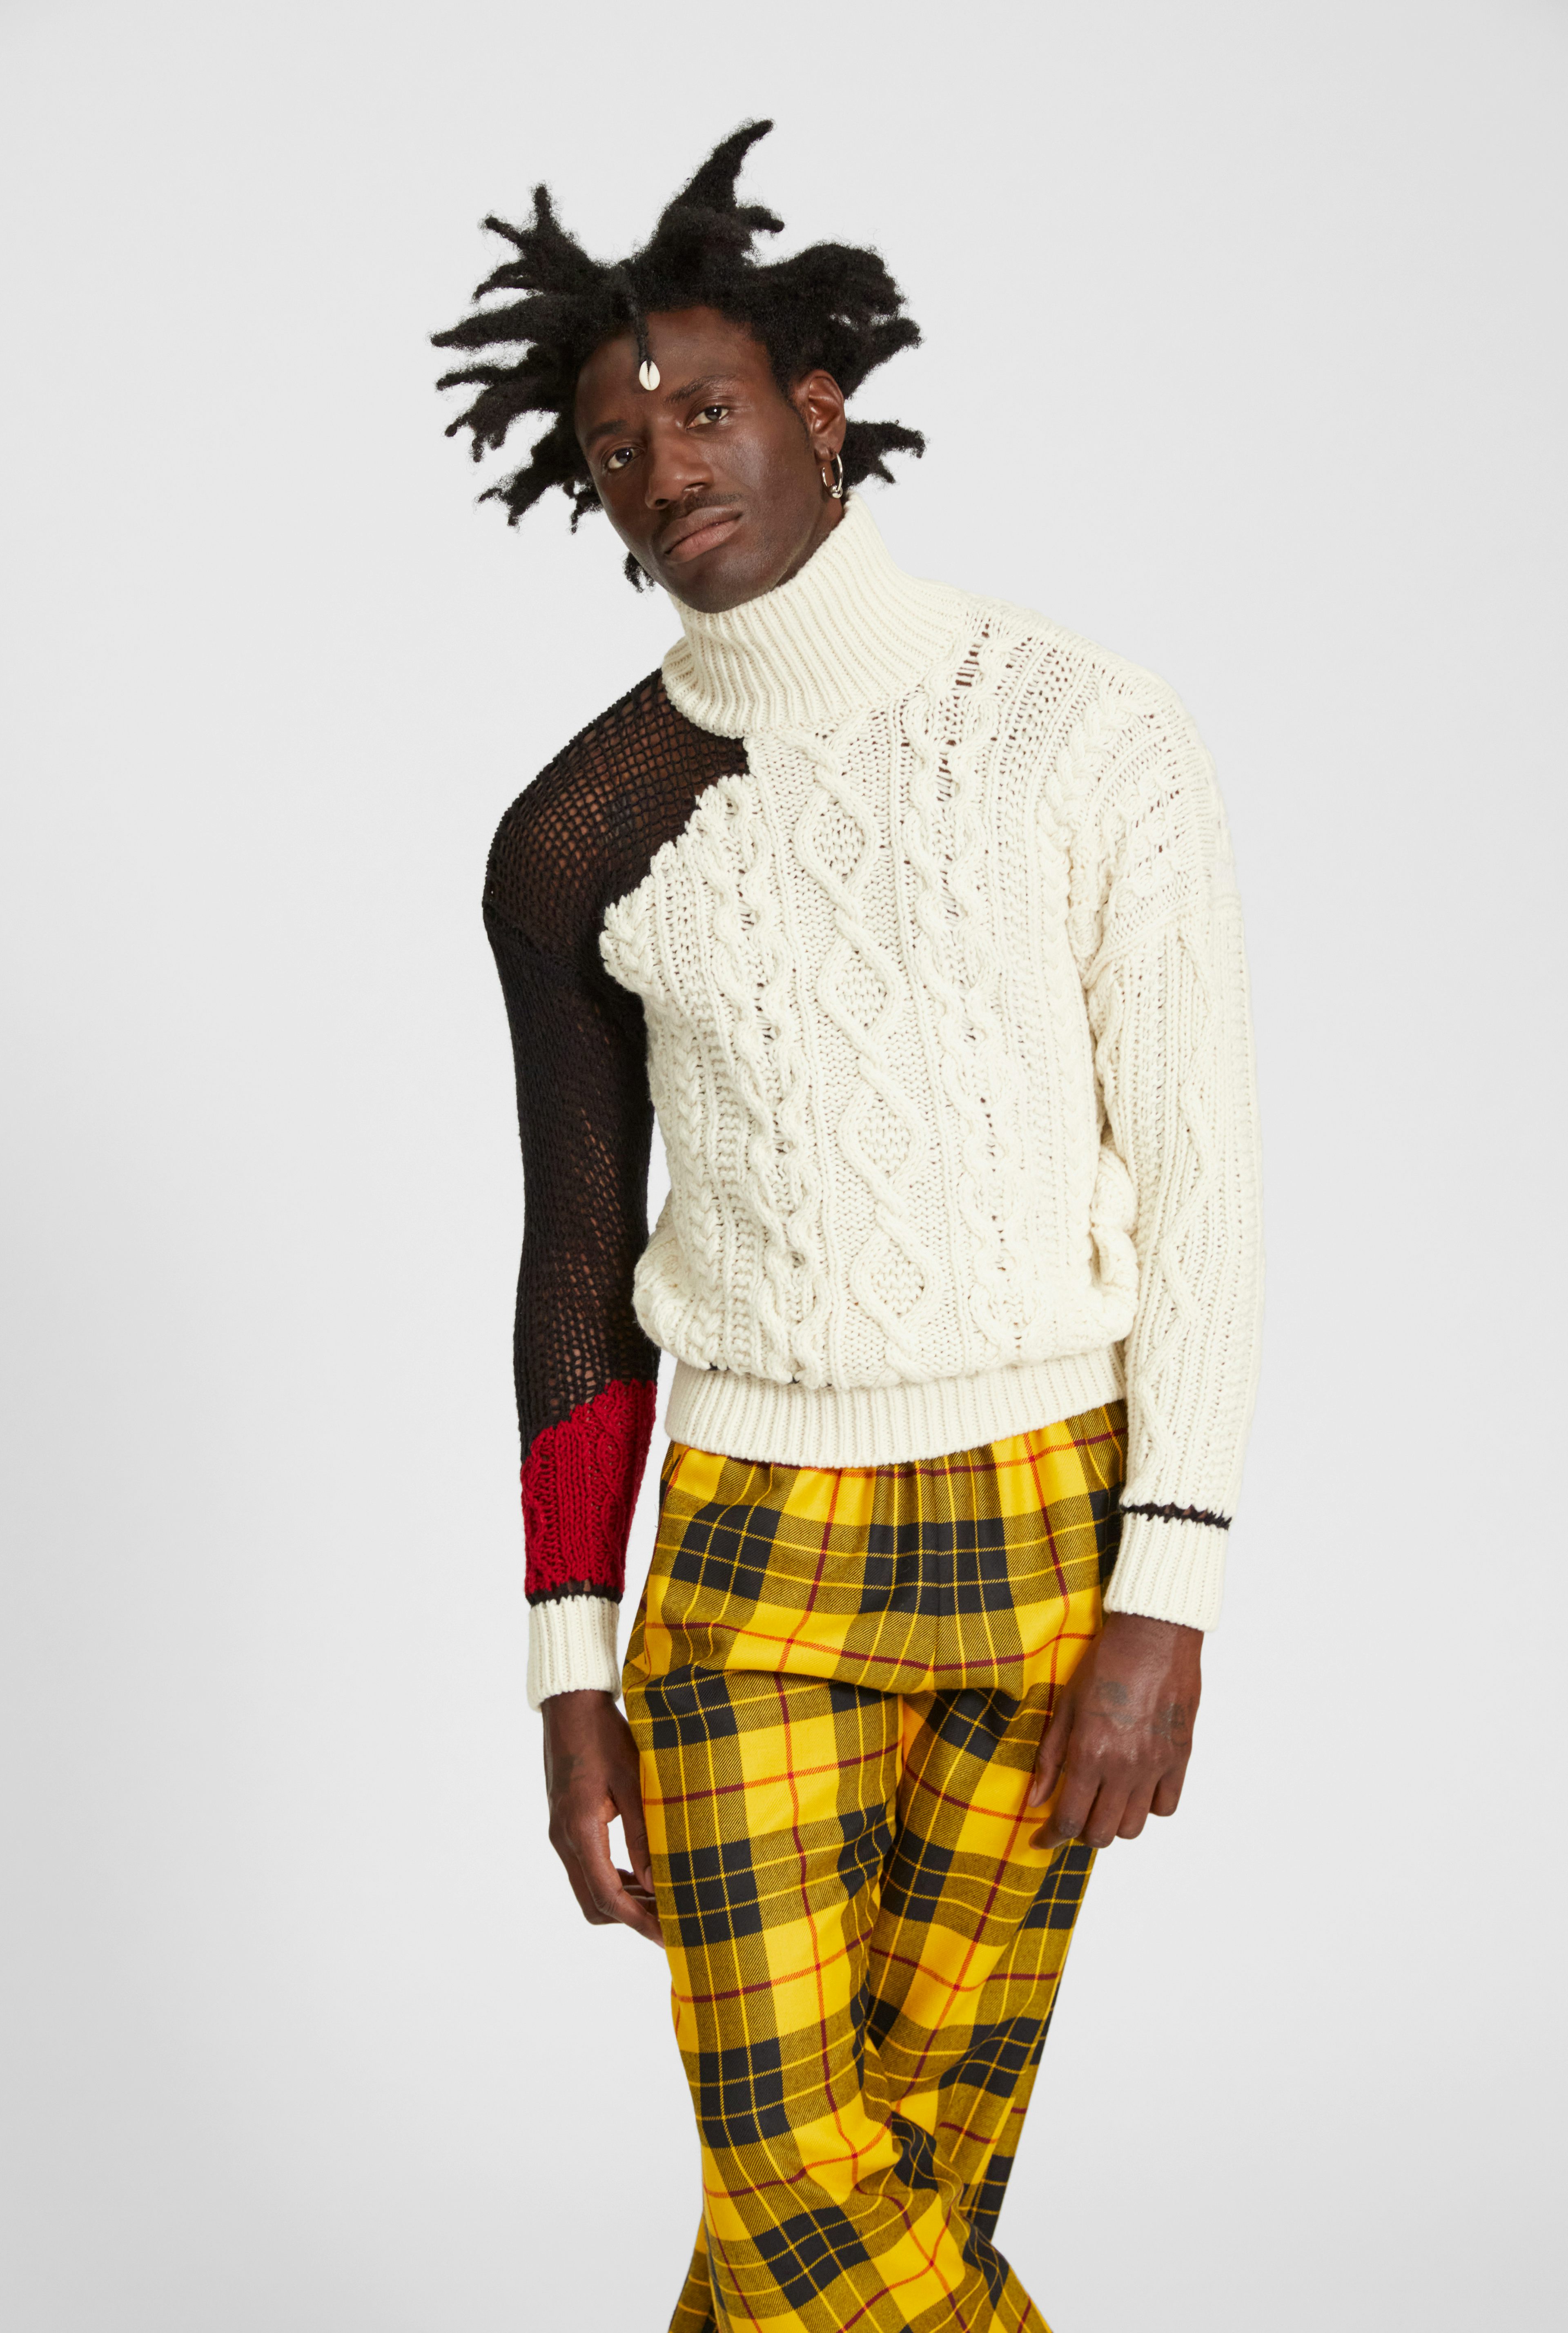 The Knit sweater